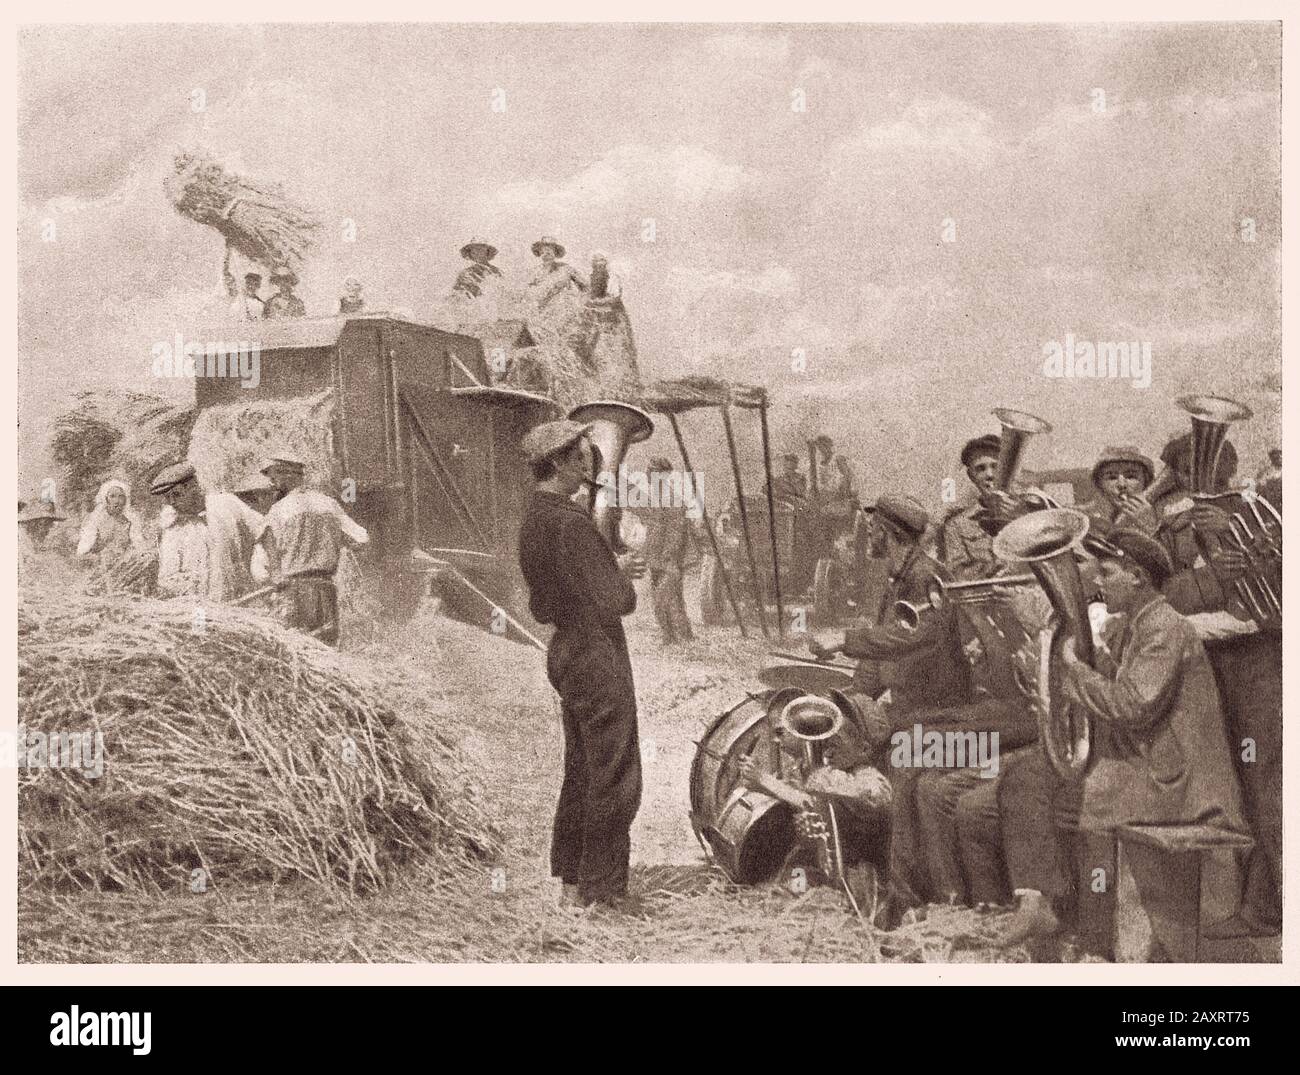 The life in Soviet Union in 1930s. From soviet propaganda book. A brass band helps in wheat harvest Stock Photo